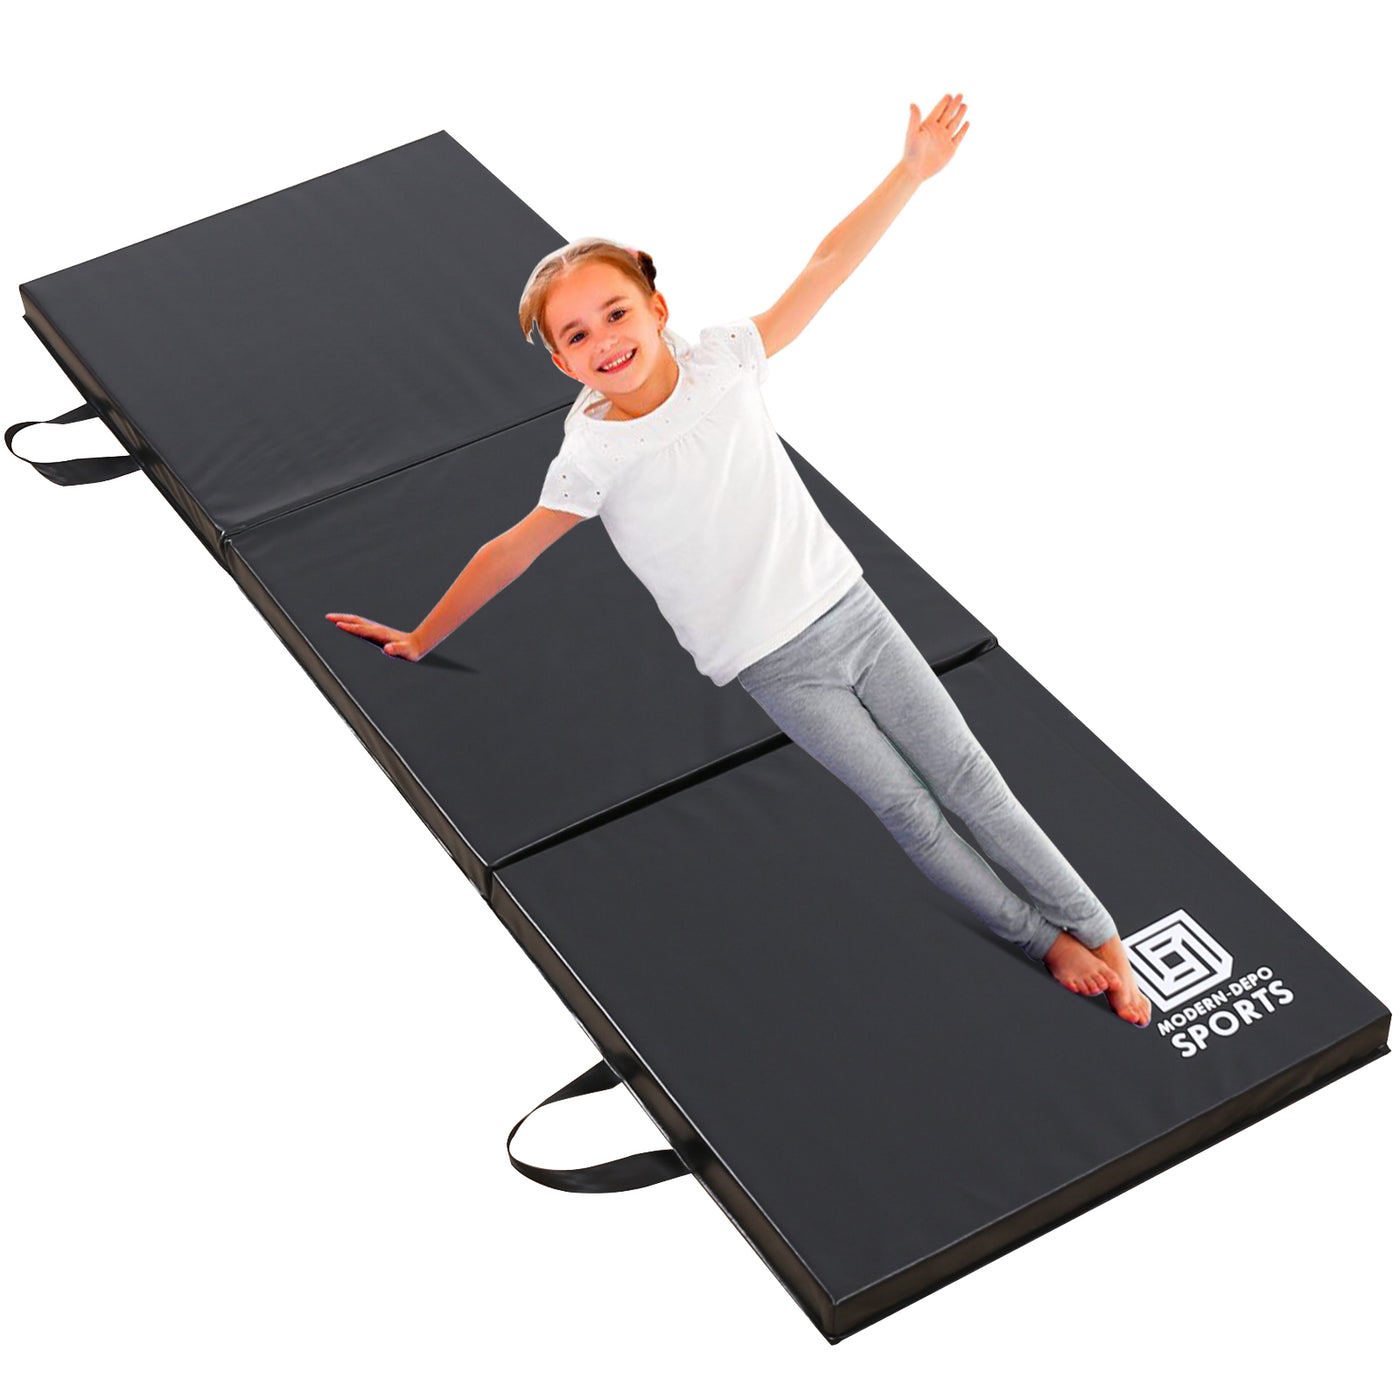 Gymnastics Mat 6'x2'x2" Foldable Tumbling Mats with Carrying Handles Three Fold Thick Exercise Mat for Home Aerobics Stretching Yoga, Black